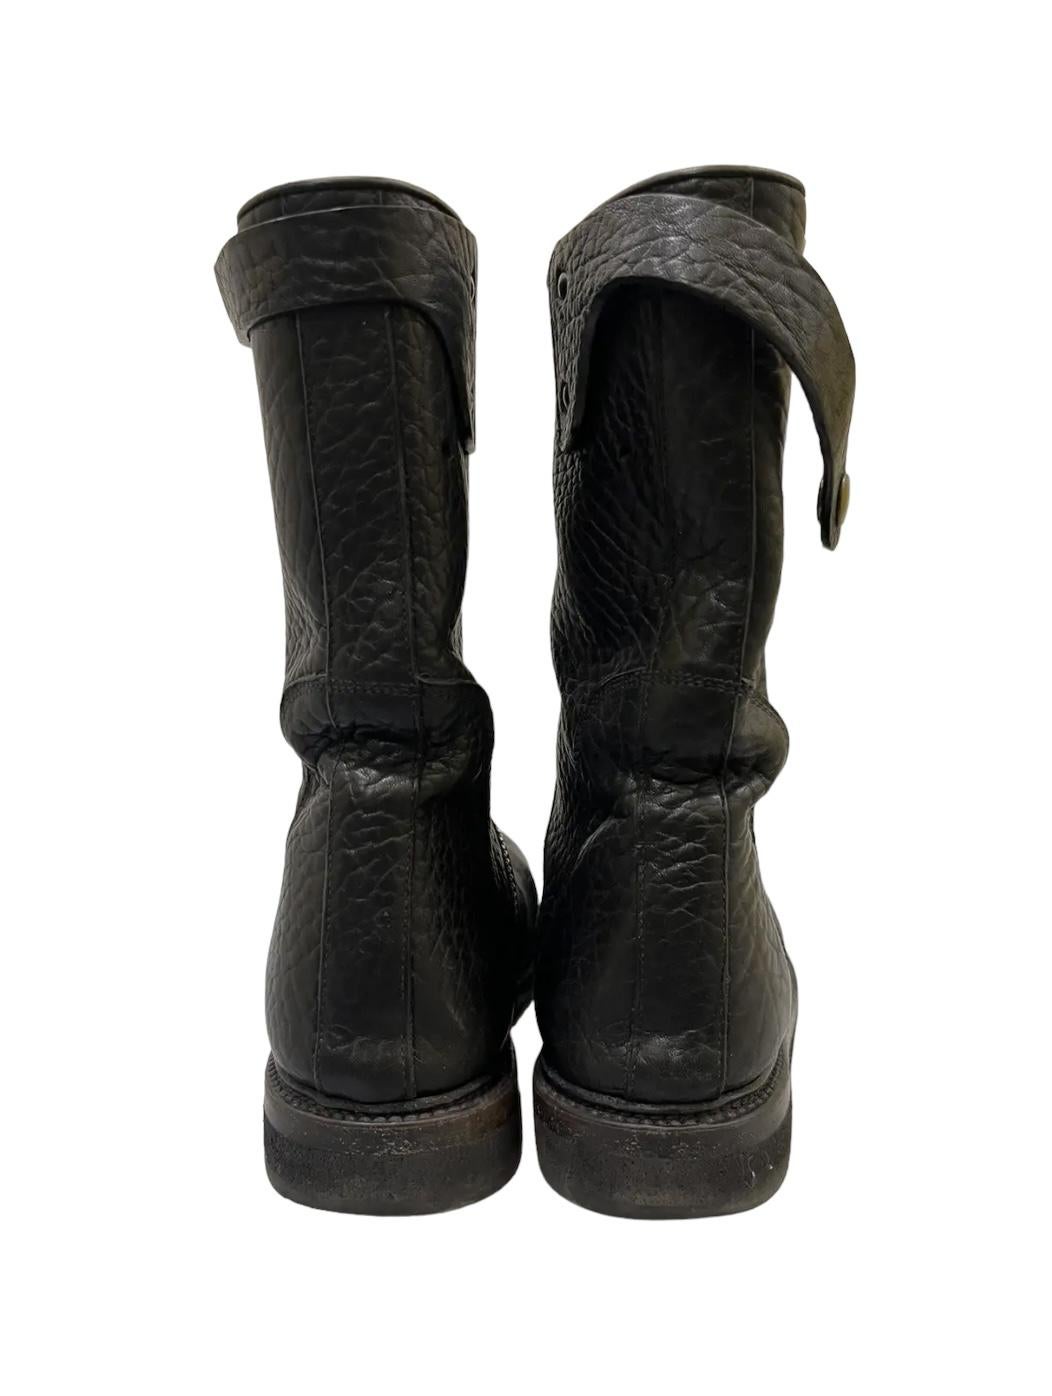 Women's Rick Owens FW 11 Limo Spiral Leather Zip Boots For Sale